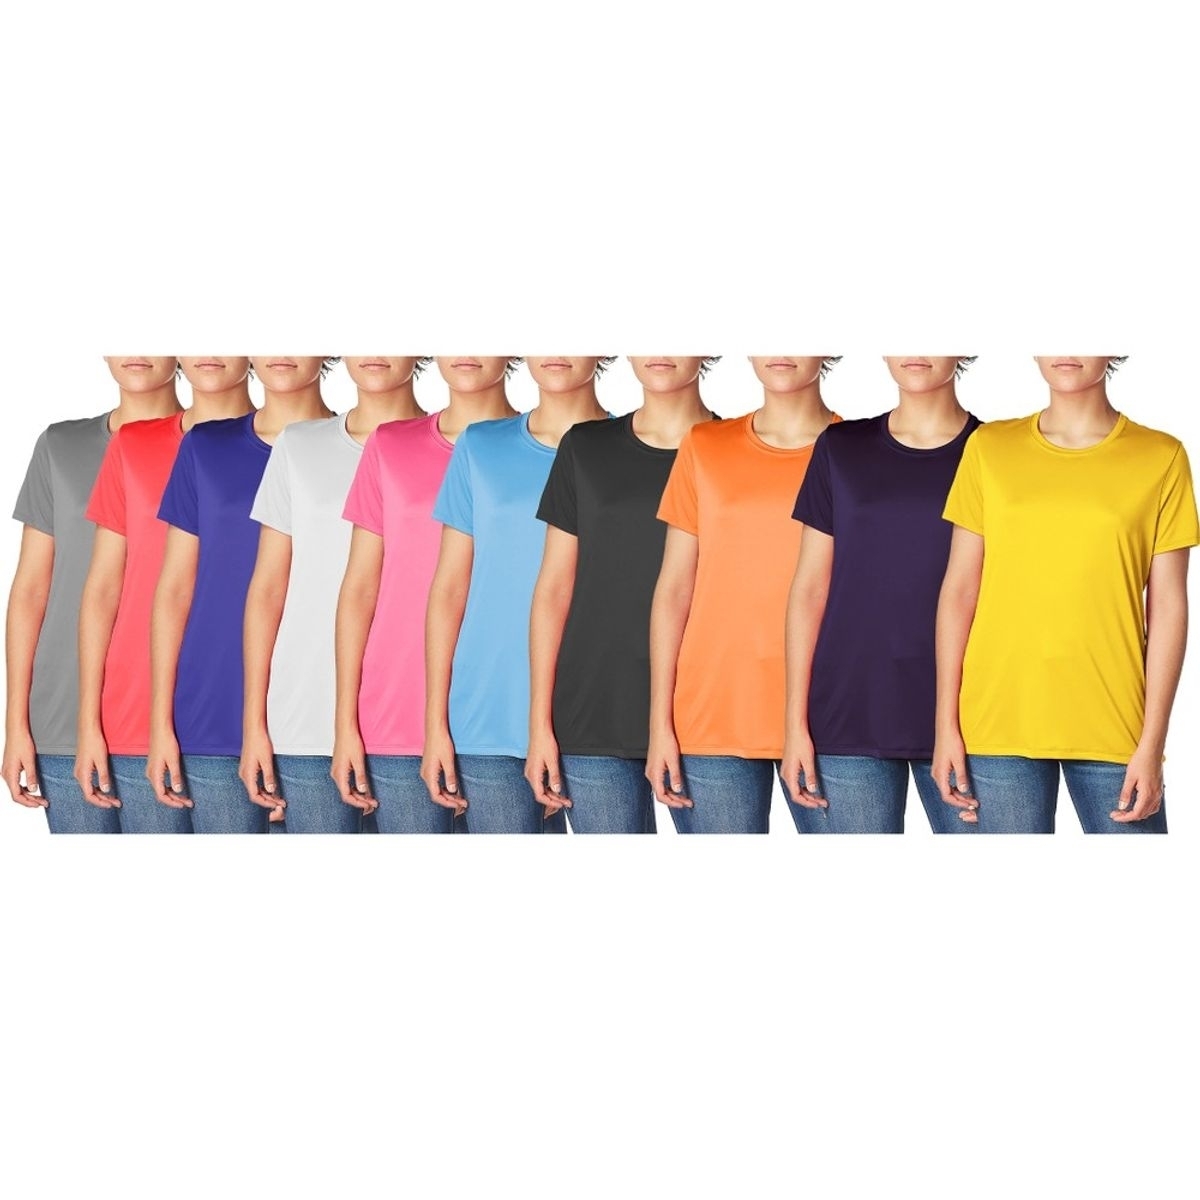 4-Pack: Women's Cool Dri-FIt Moisture Wicking Sim-Fit Long Sleeve Crew Neck T-Shirts - Small